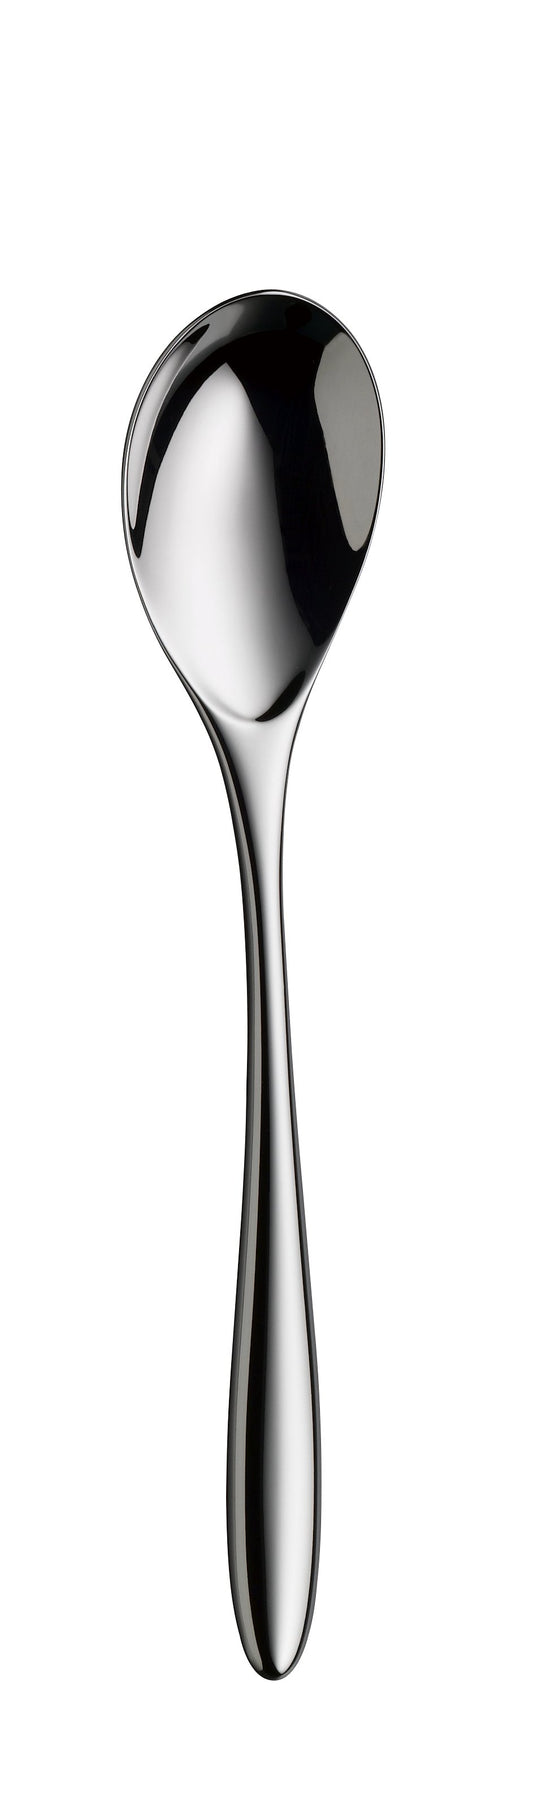 Dessert spoon AVES silverplated 201mm